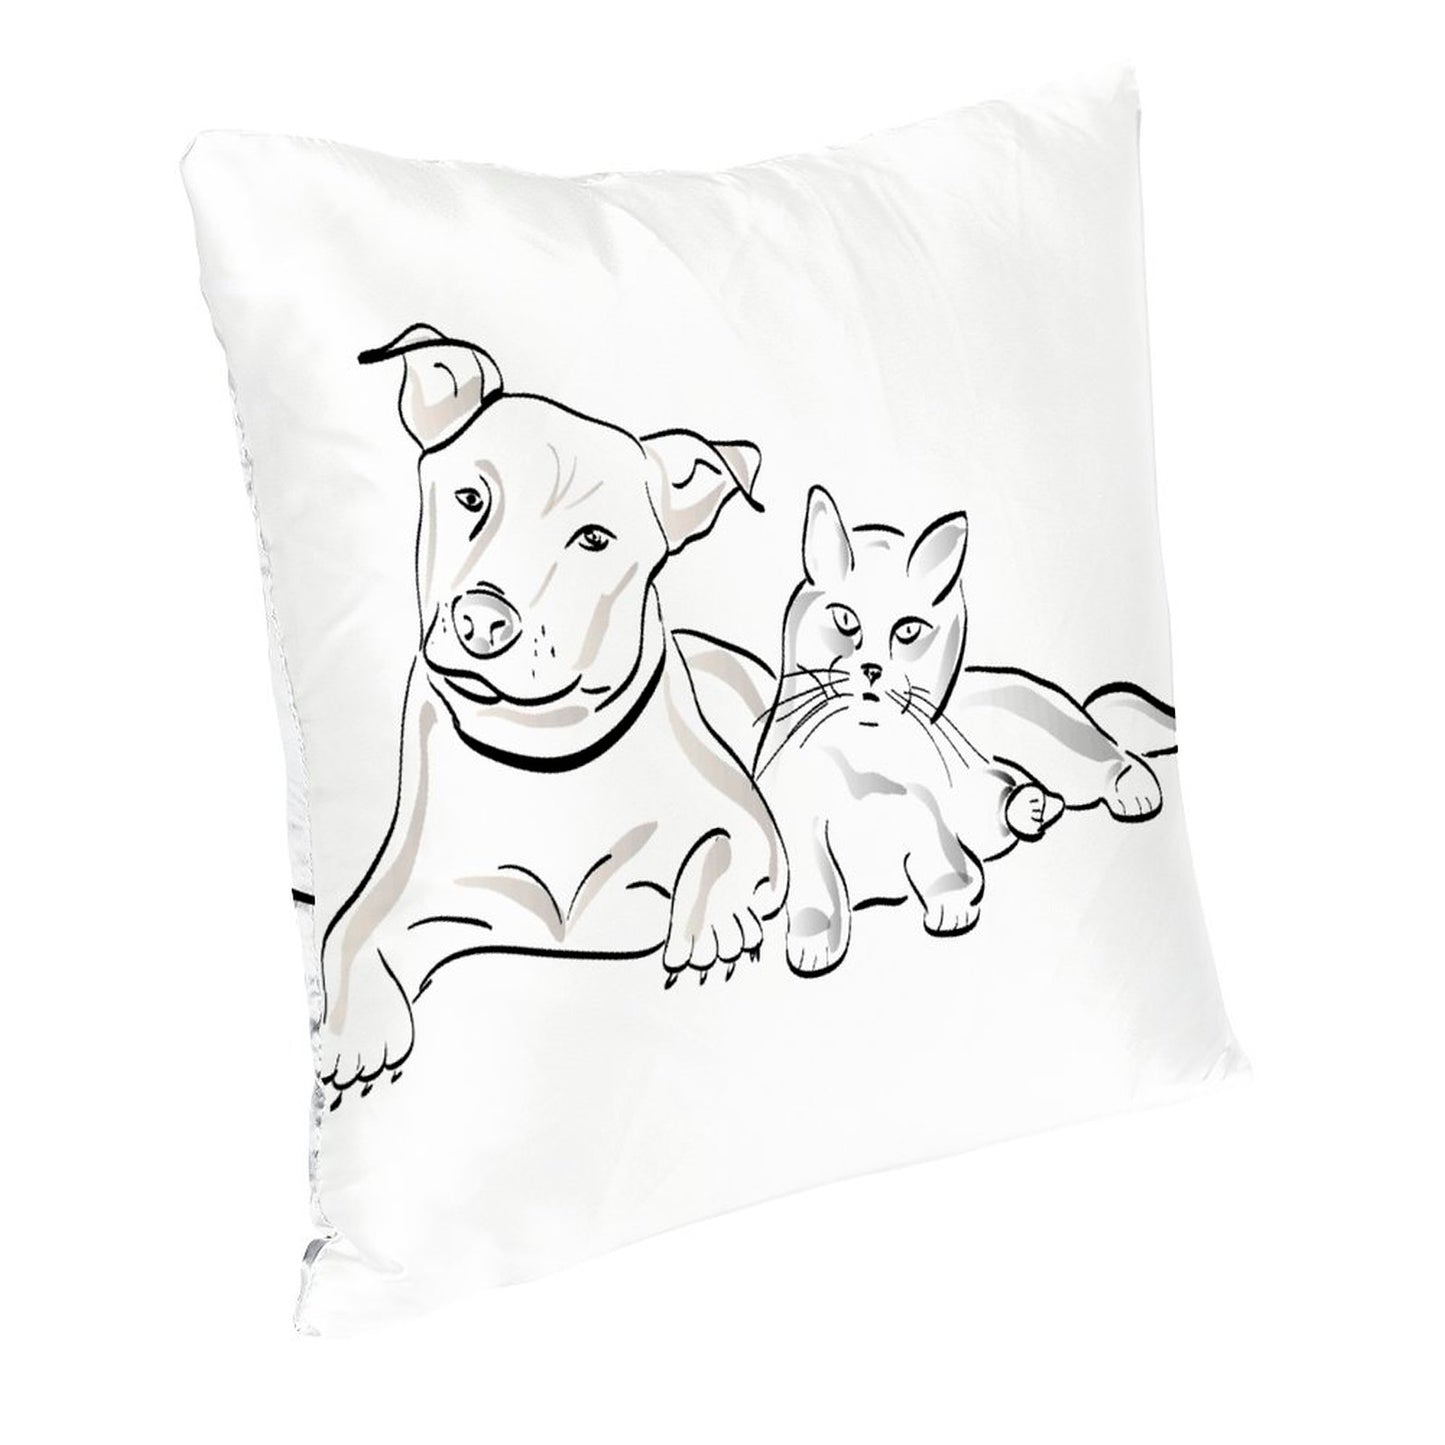 Online Custom Satin Pillow Case Sketch Drawing Dog & Cat White Background Only Pillowcase